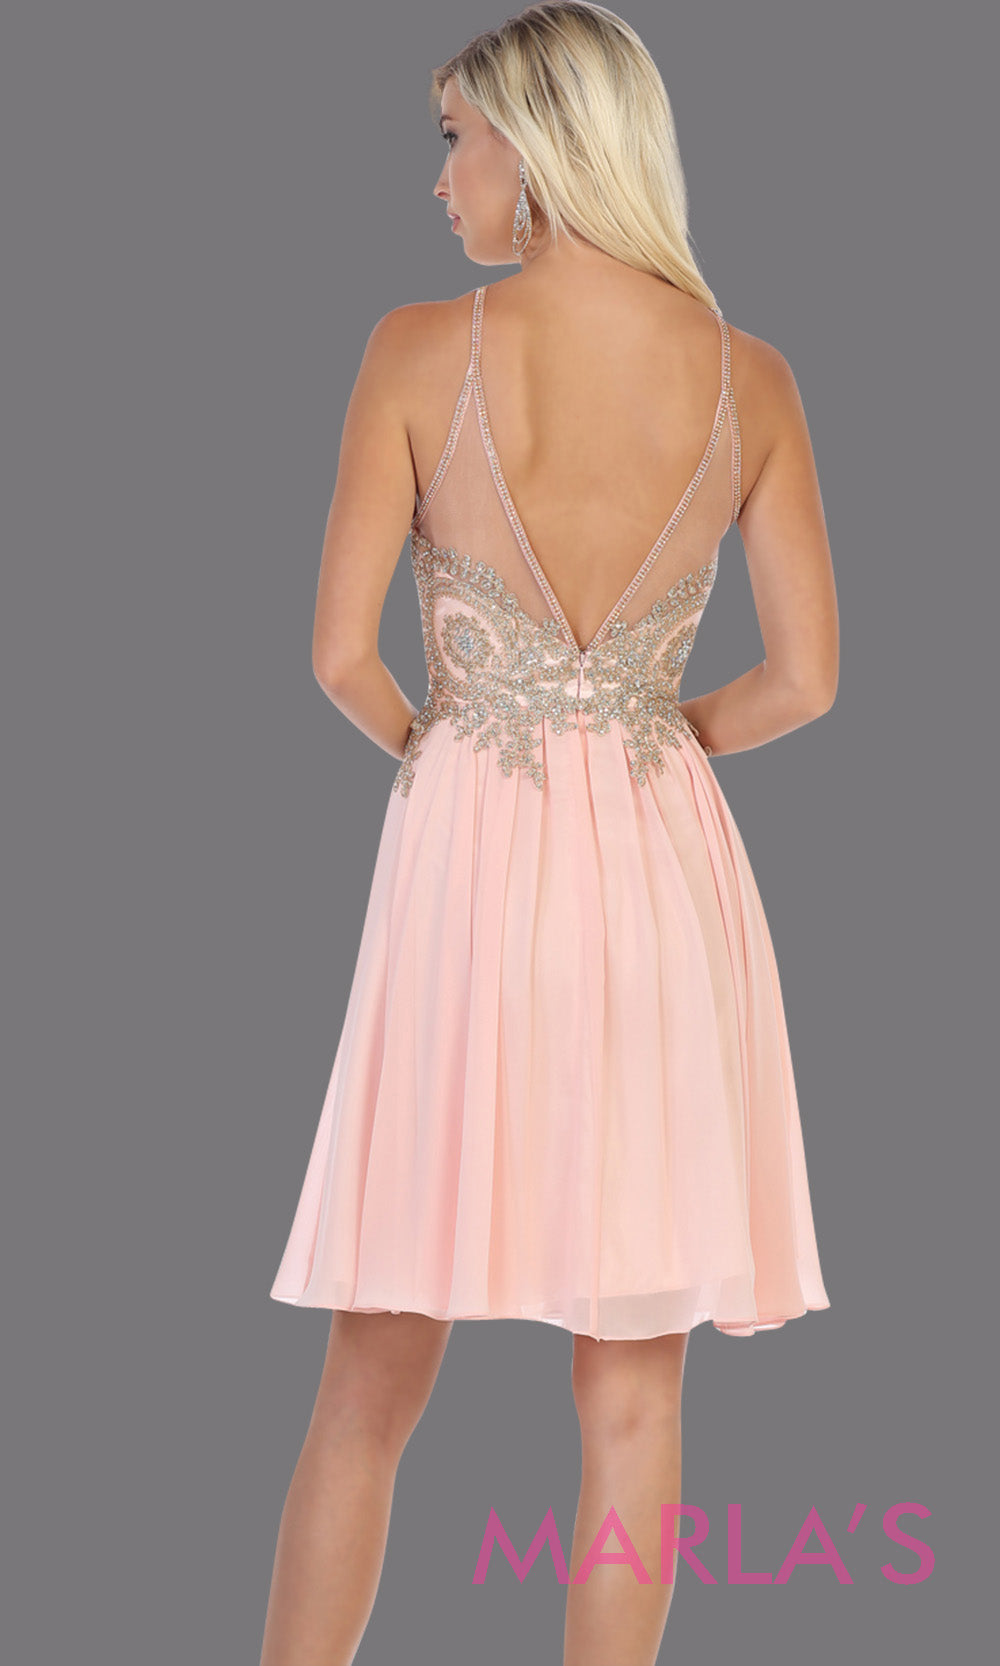 Back of Short high neck blush pink grade 8 graduation dress with flowy skirt from mayqueen. This light pink low back flowy dress is perfect for plus size grad, homecoming, Bat Mitzvah, quinceanera damas, middle school graduation, junior bridesmaidsgrade 8 grad dresses, graduation dresses